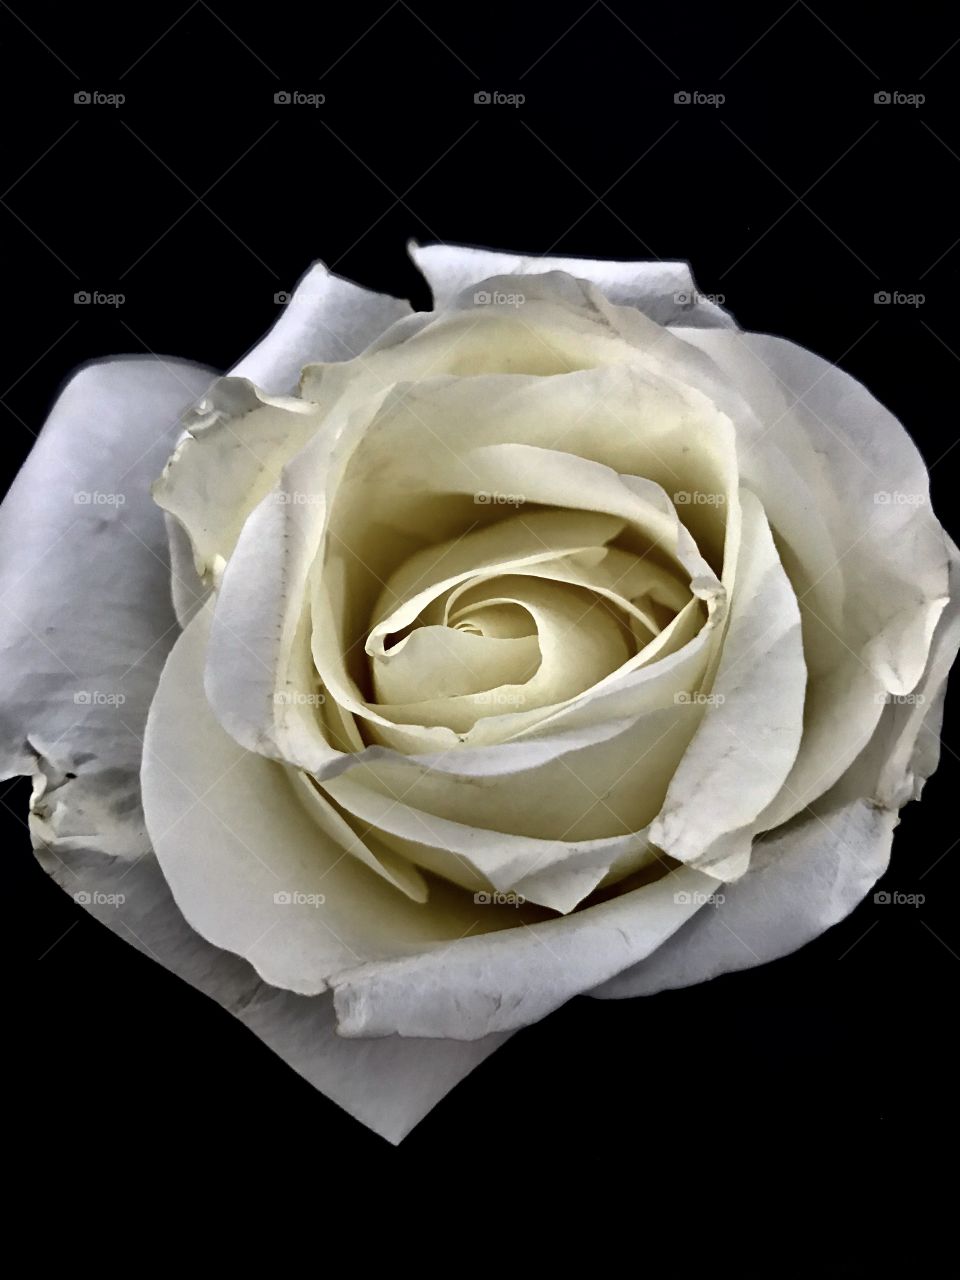 Photographed a white rose resting on top of the 9/11 memorial fountain at the World Trade Center in New York City today.